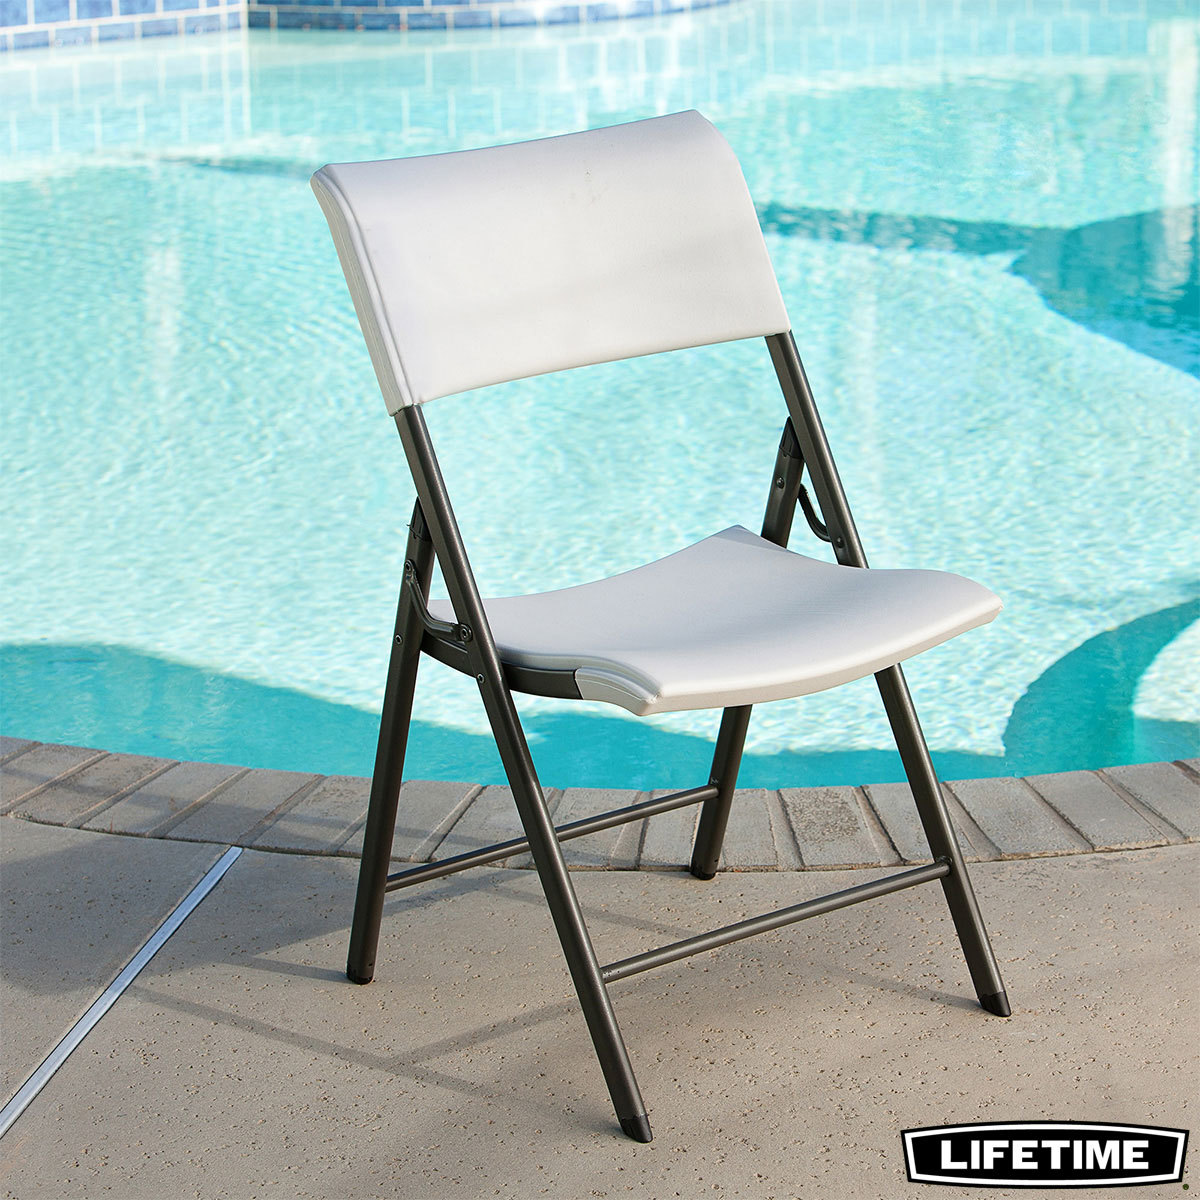 Lifetime Folding Chair Light Commercial, Outdoor Foldable Chairs Costco